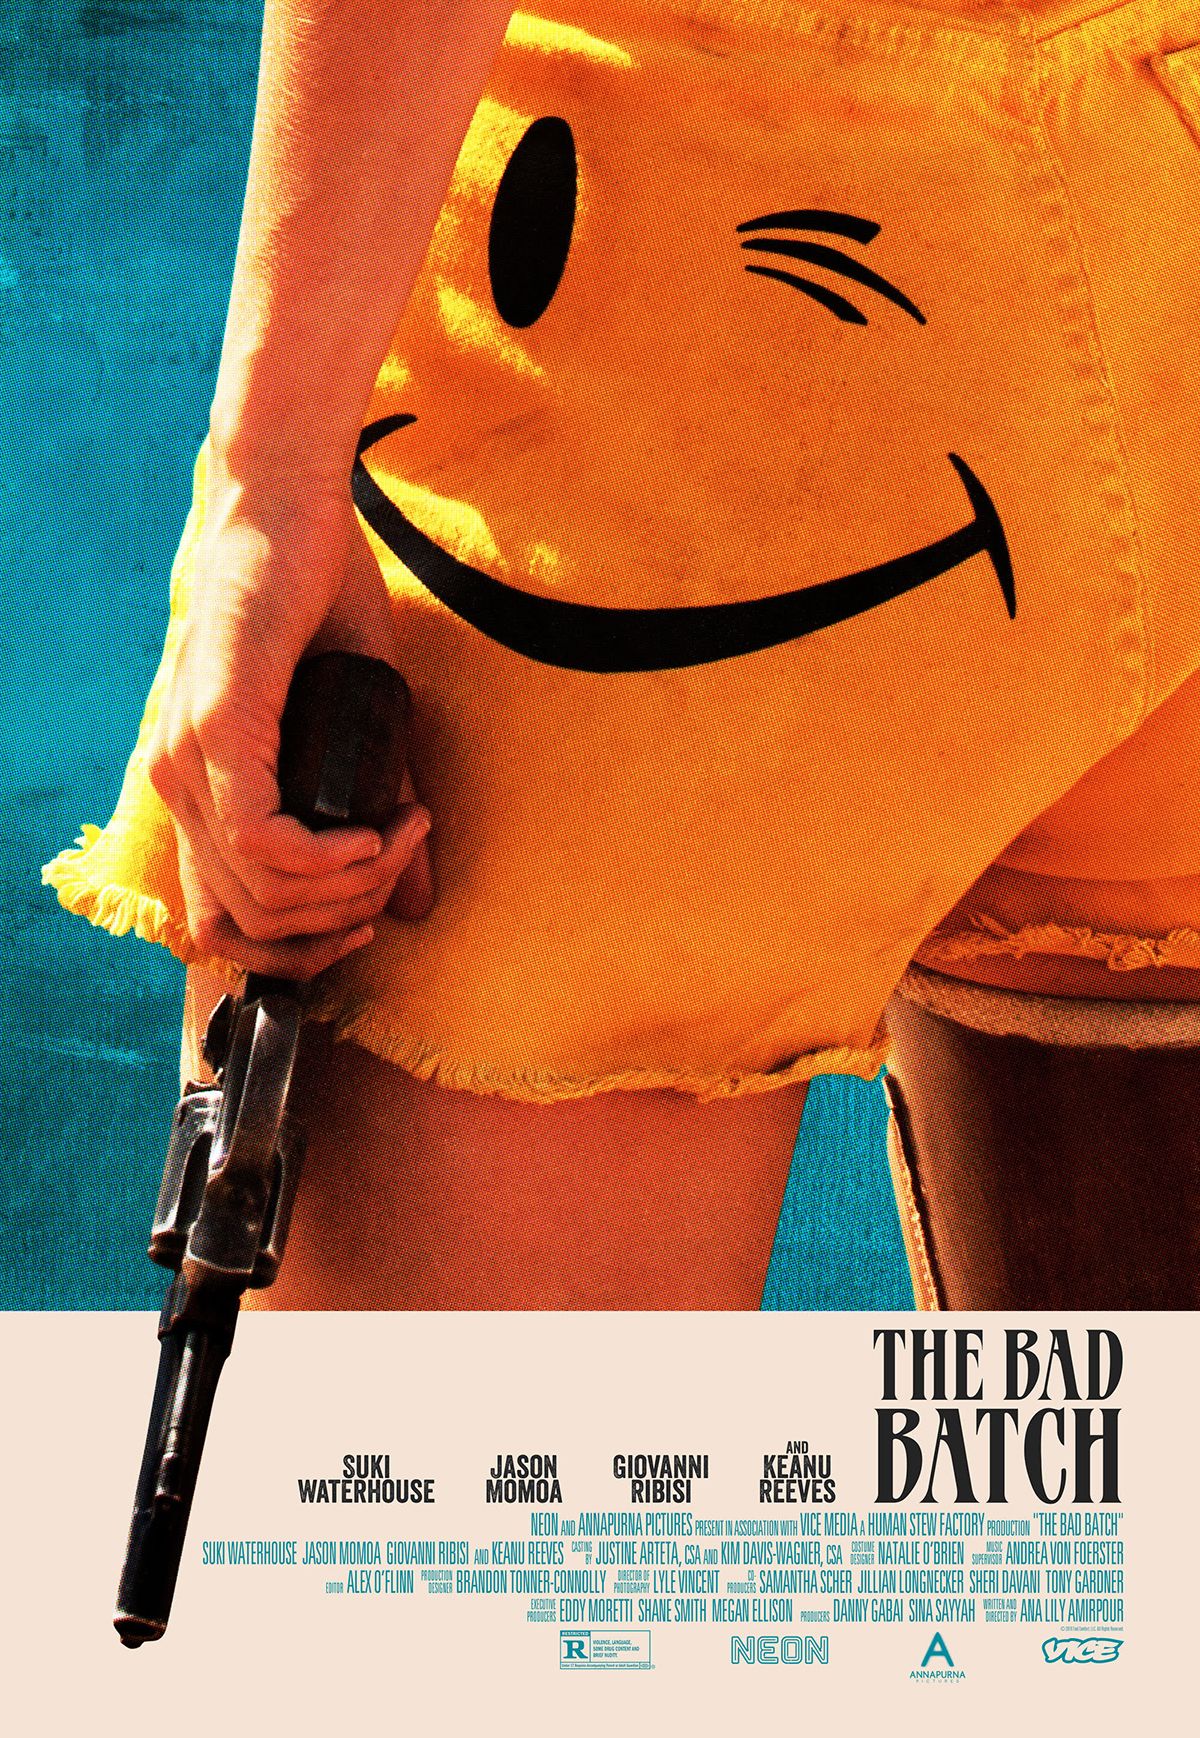 The Bad Batch Upcoming Movies. Movie Database. JoBlo.com, Release Date Latest Picture, Posters, Videos and News